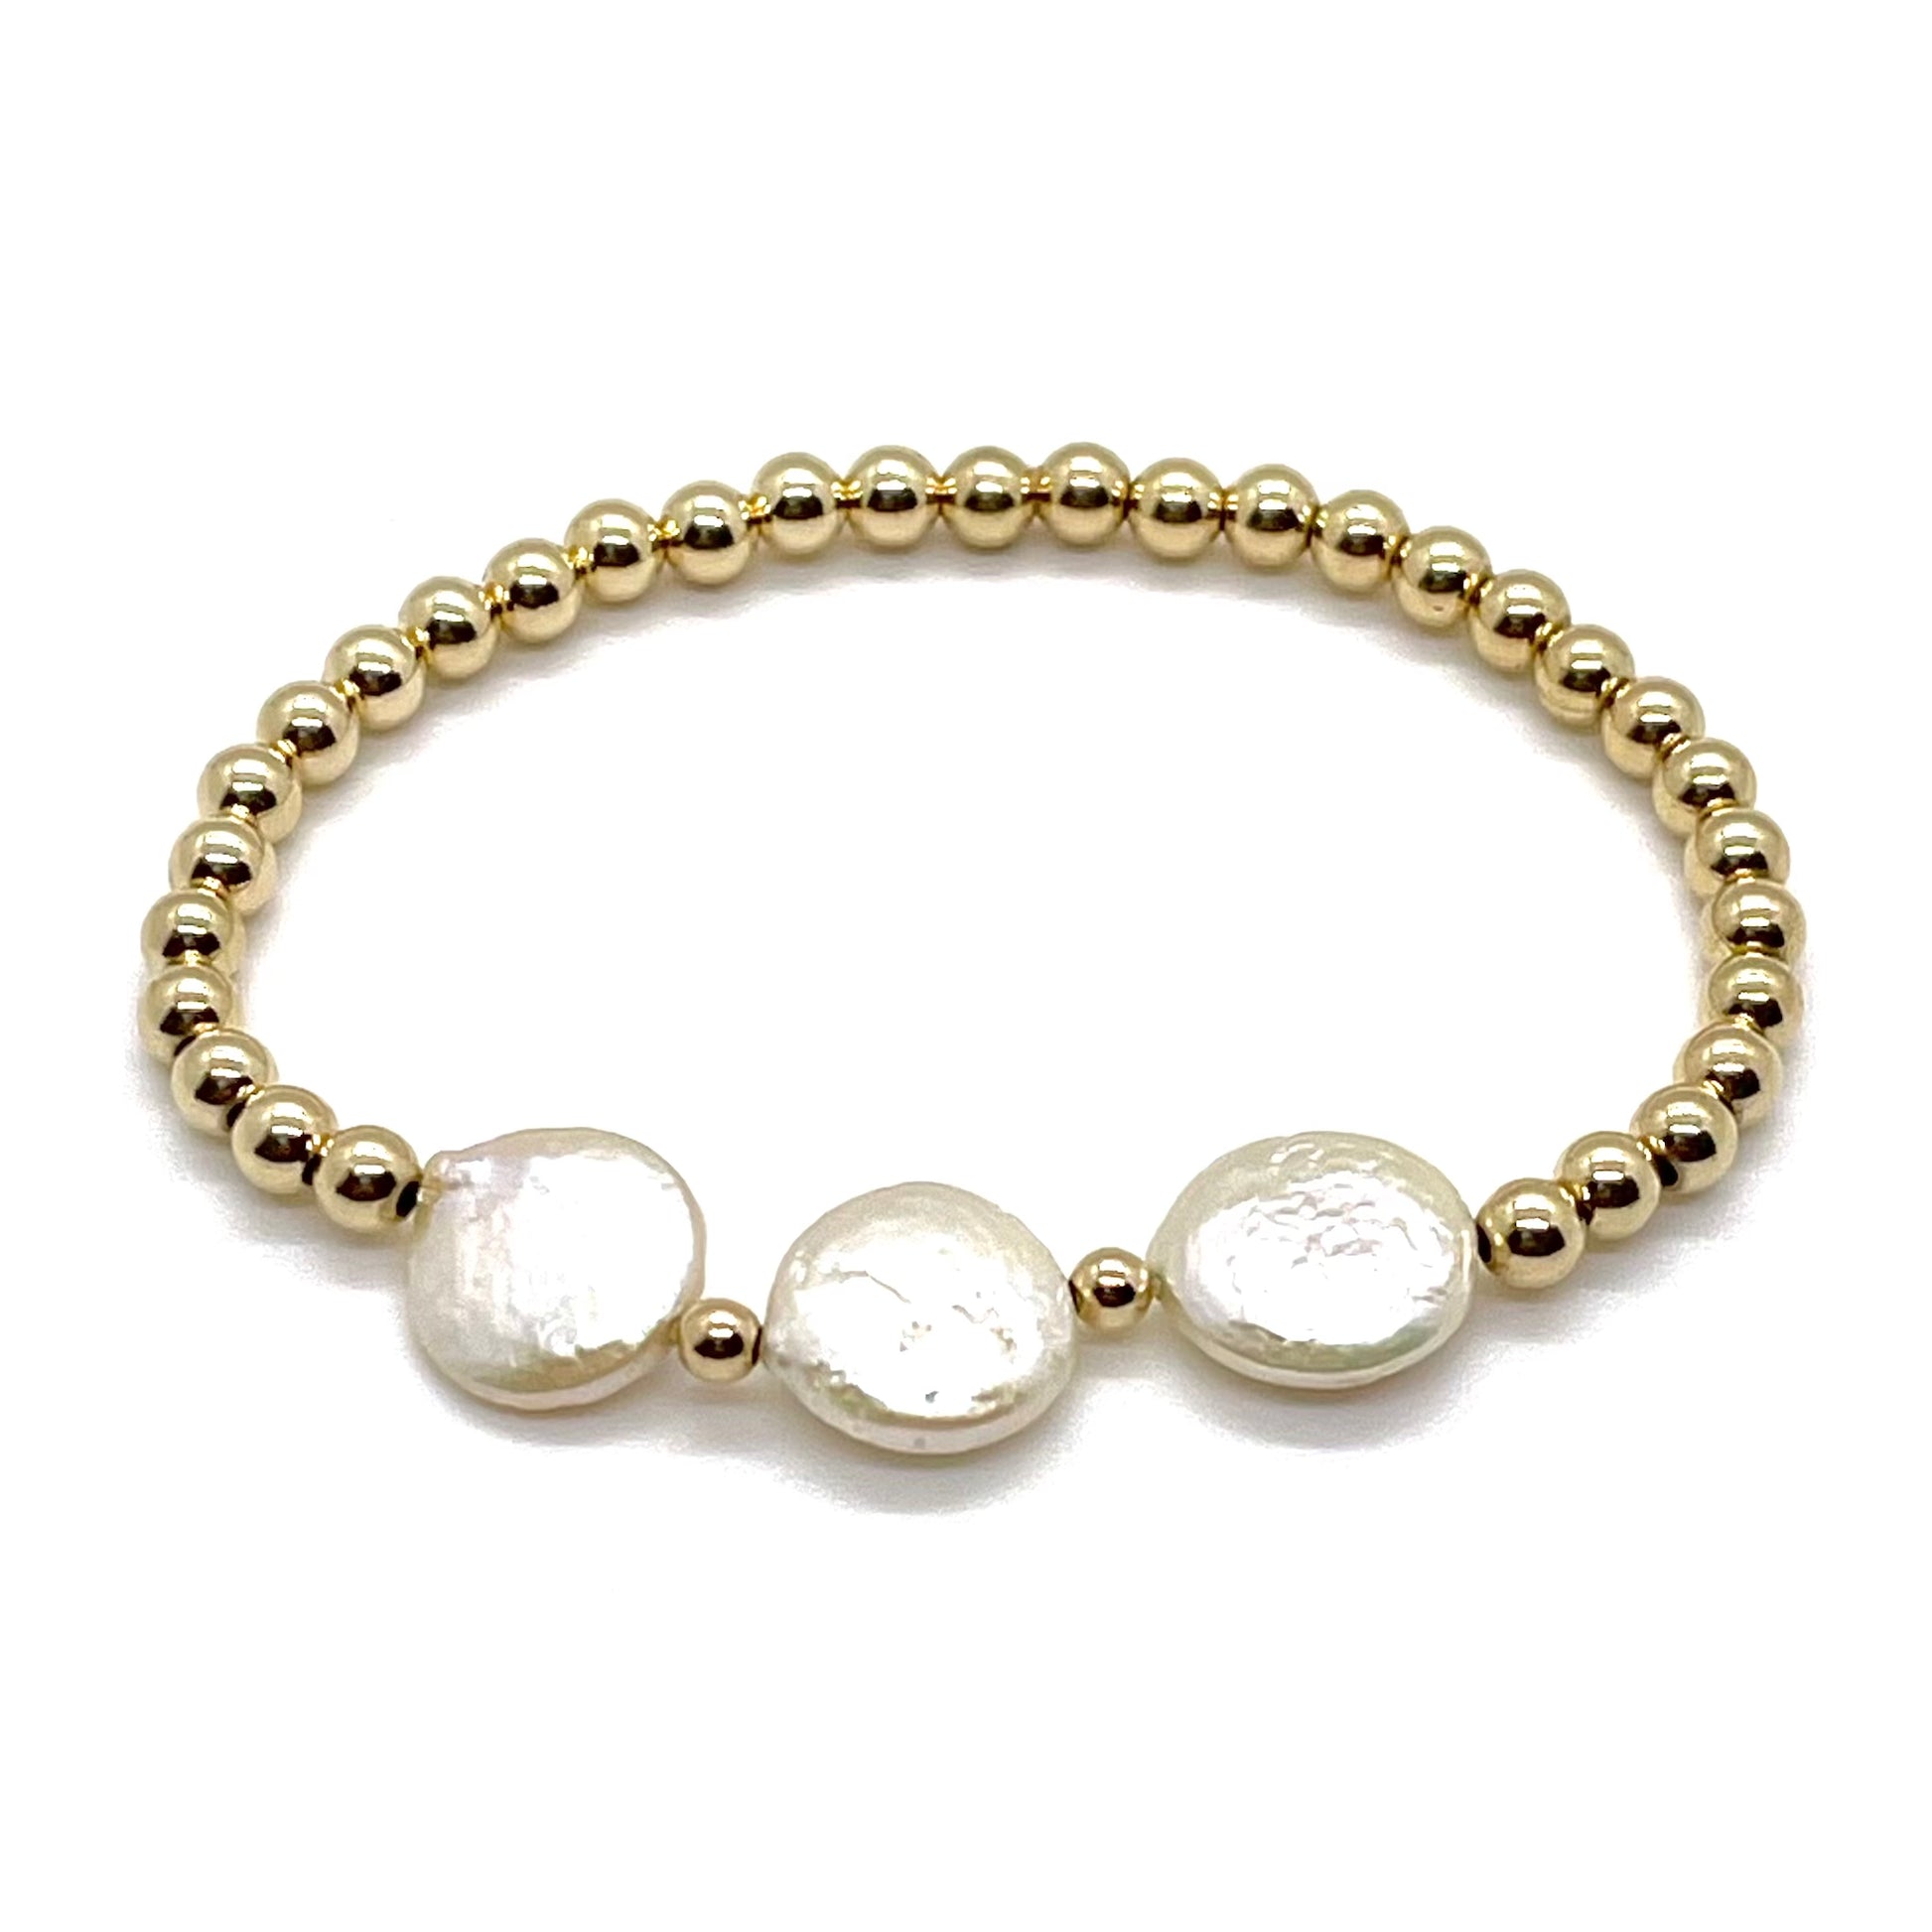 Gold bracelet with freshwater coin pearls and 4mm gold ball beads on elastic stretch cord.